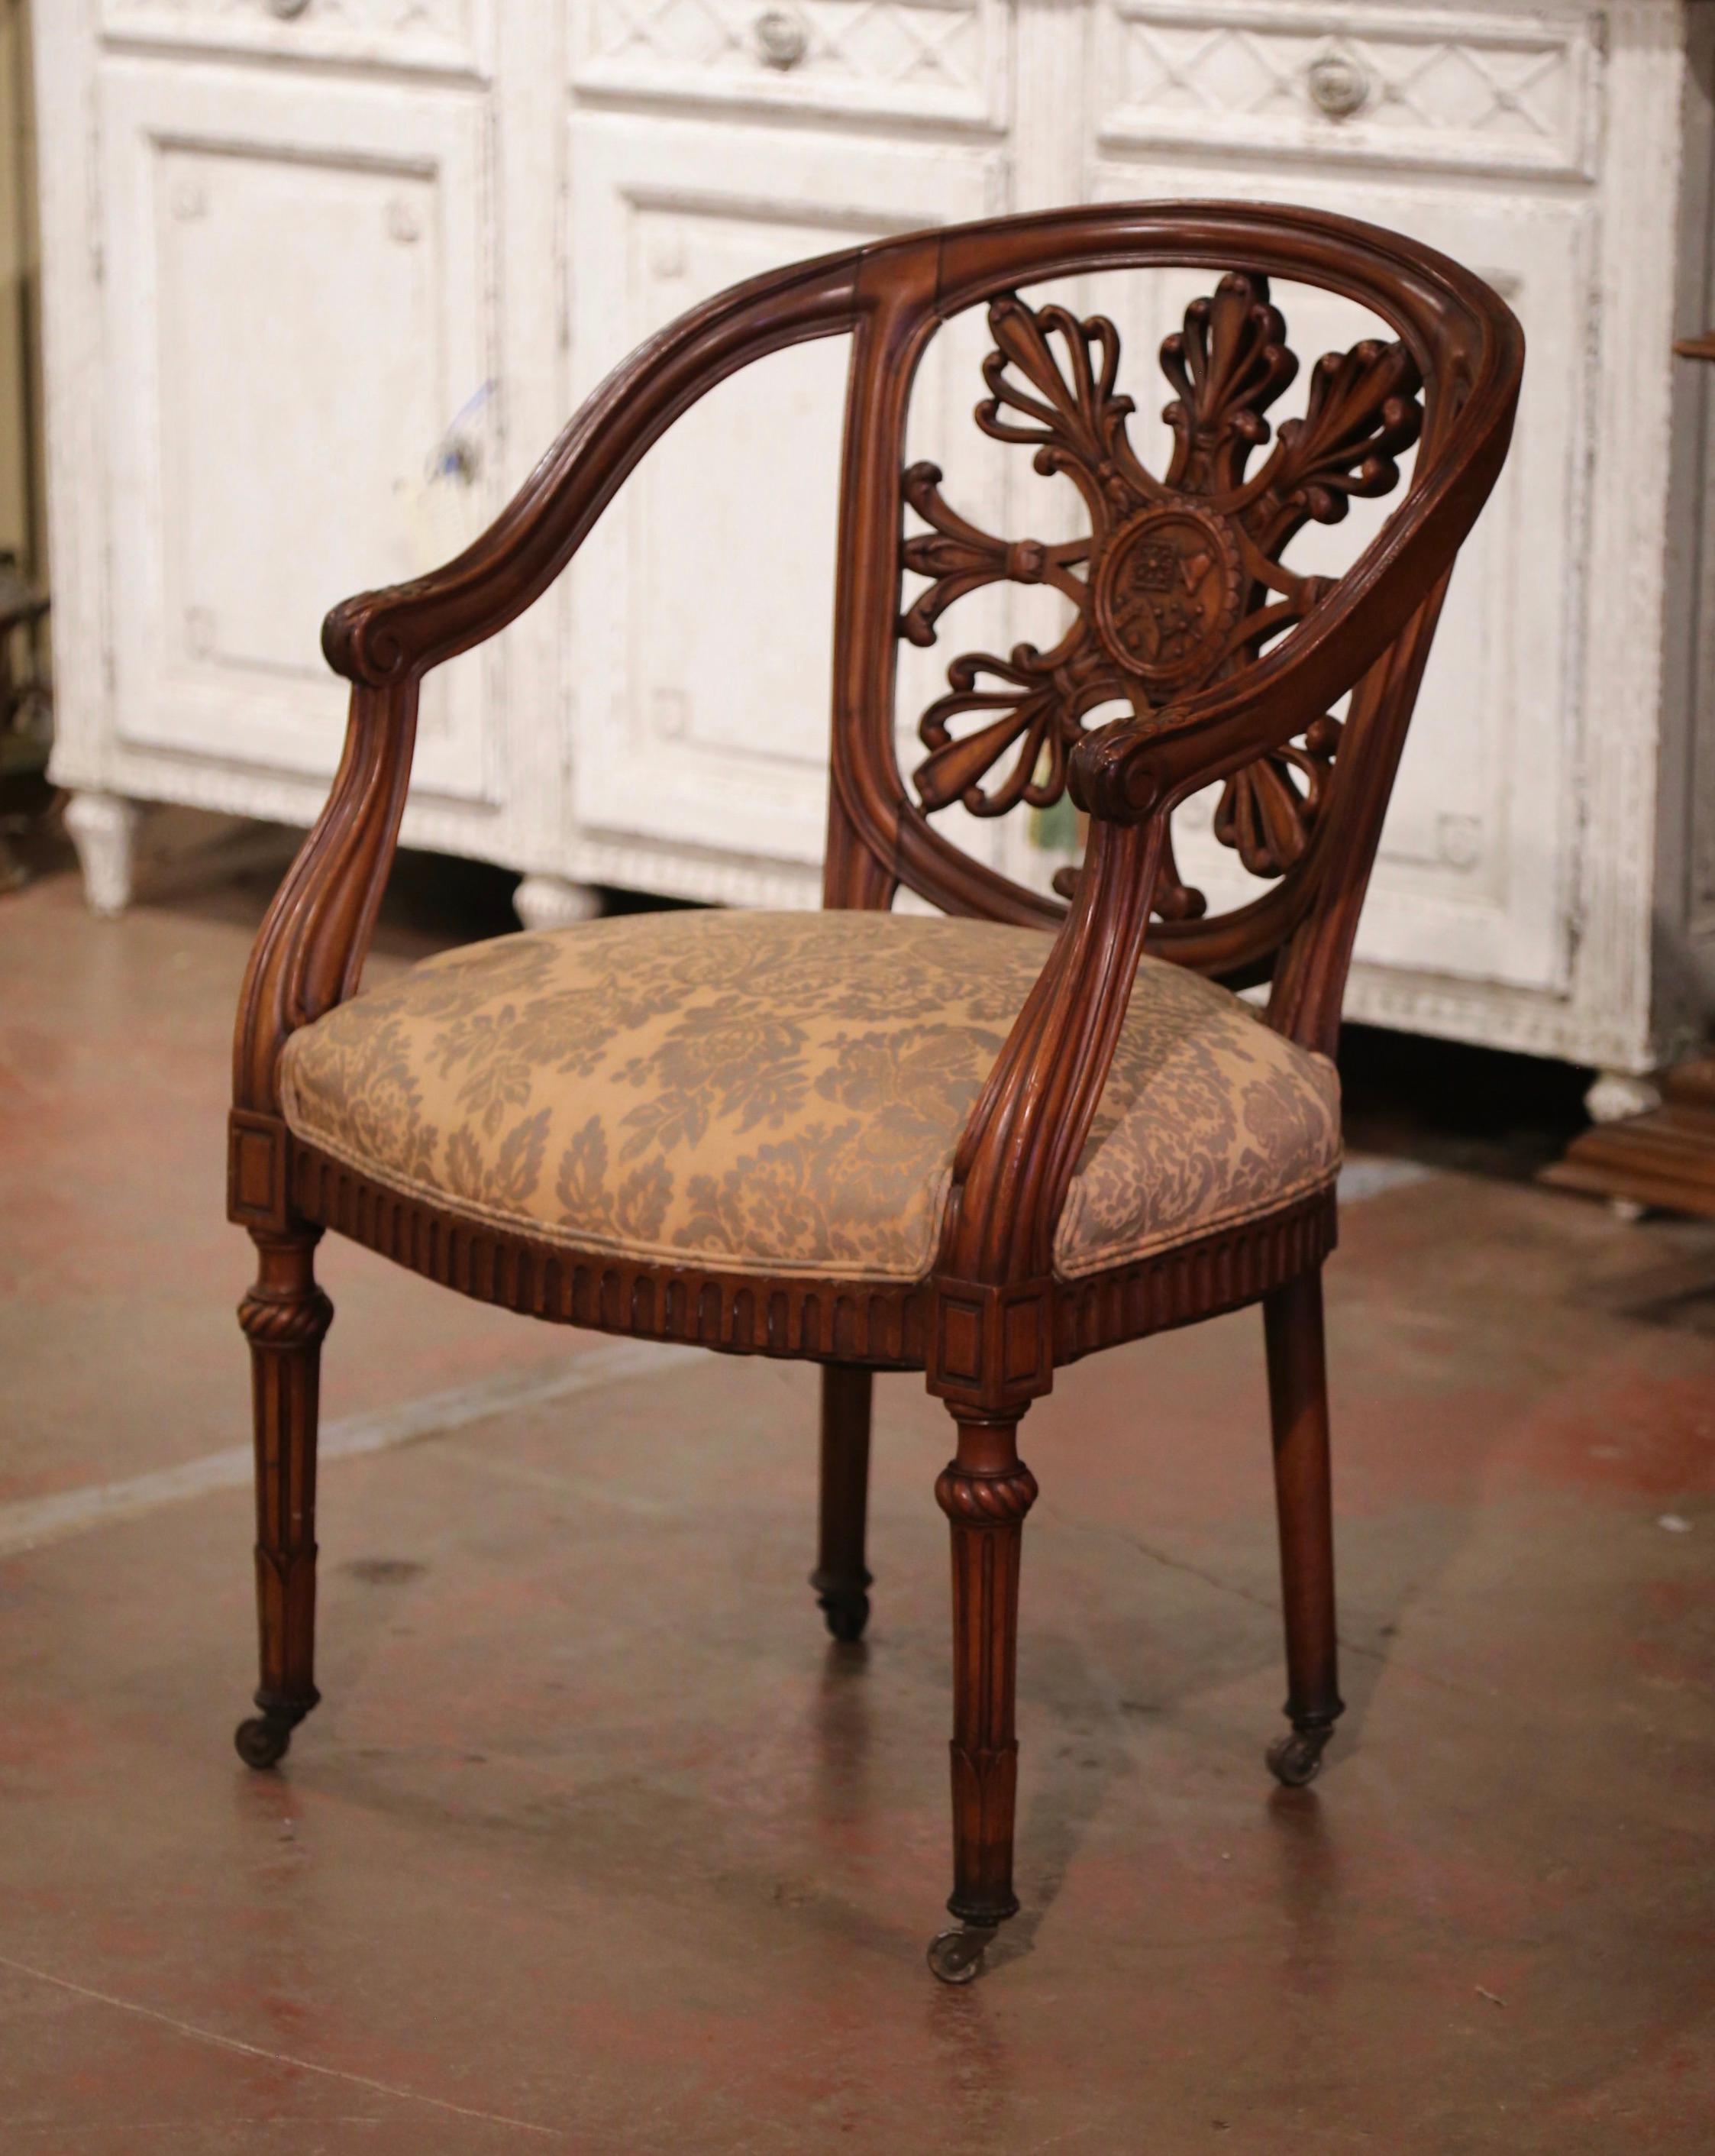 Decorate an office with this beautifully carved antique desk armchair. Crafted in France circa 1880, the fruitwood chair stands on tapered and turned legs decorated with twisted leaf motifs around the legs and ending with coasters. The comfortable